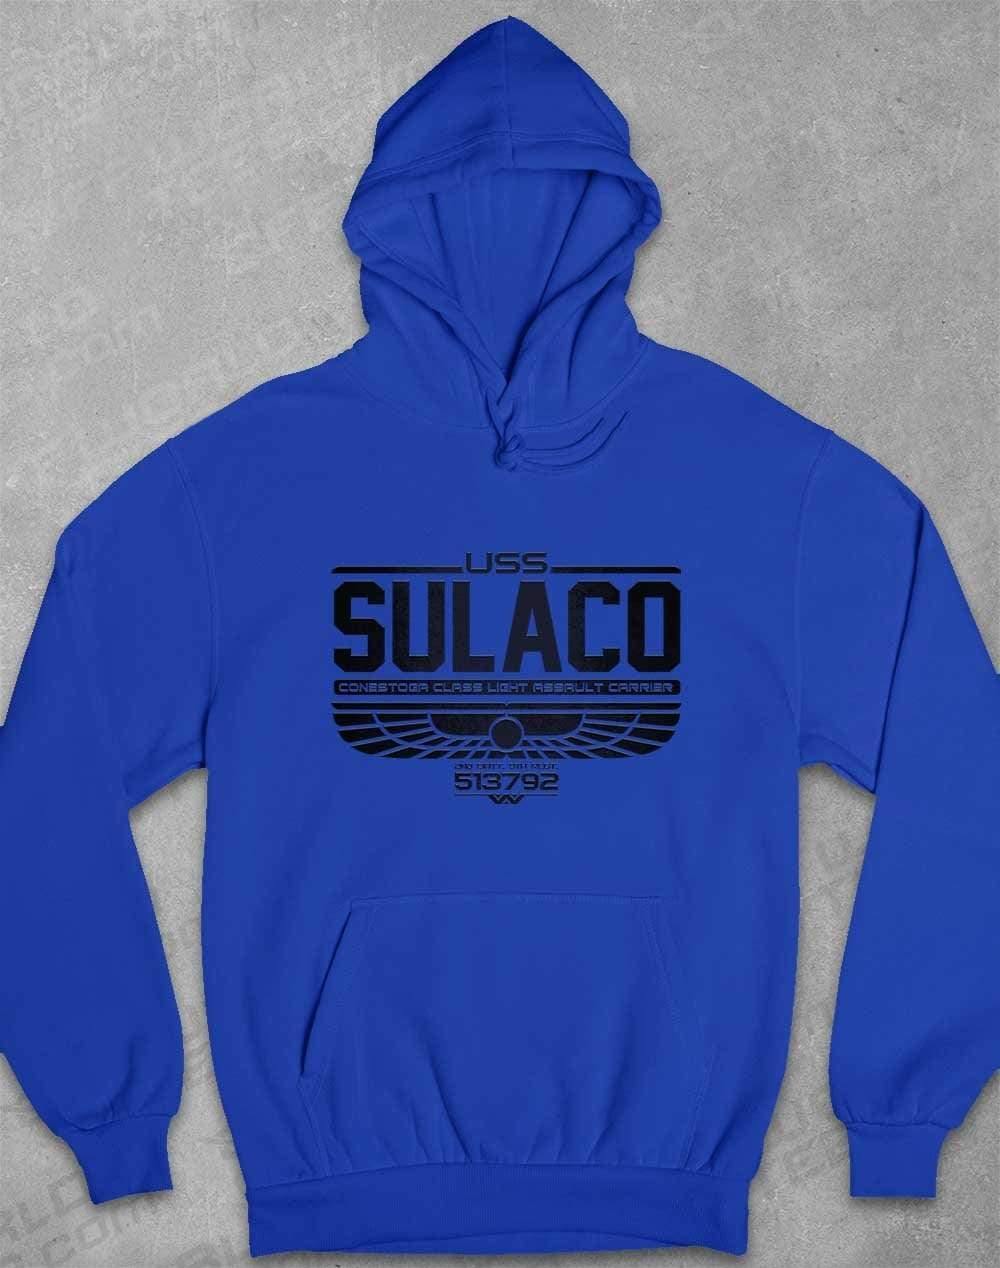 USS Sulaco Hoodie XS / Royal Blue  - Off World Tees